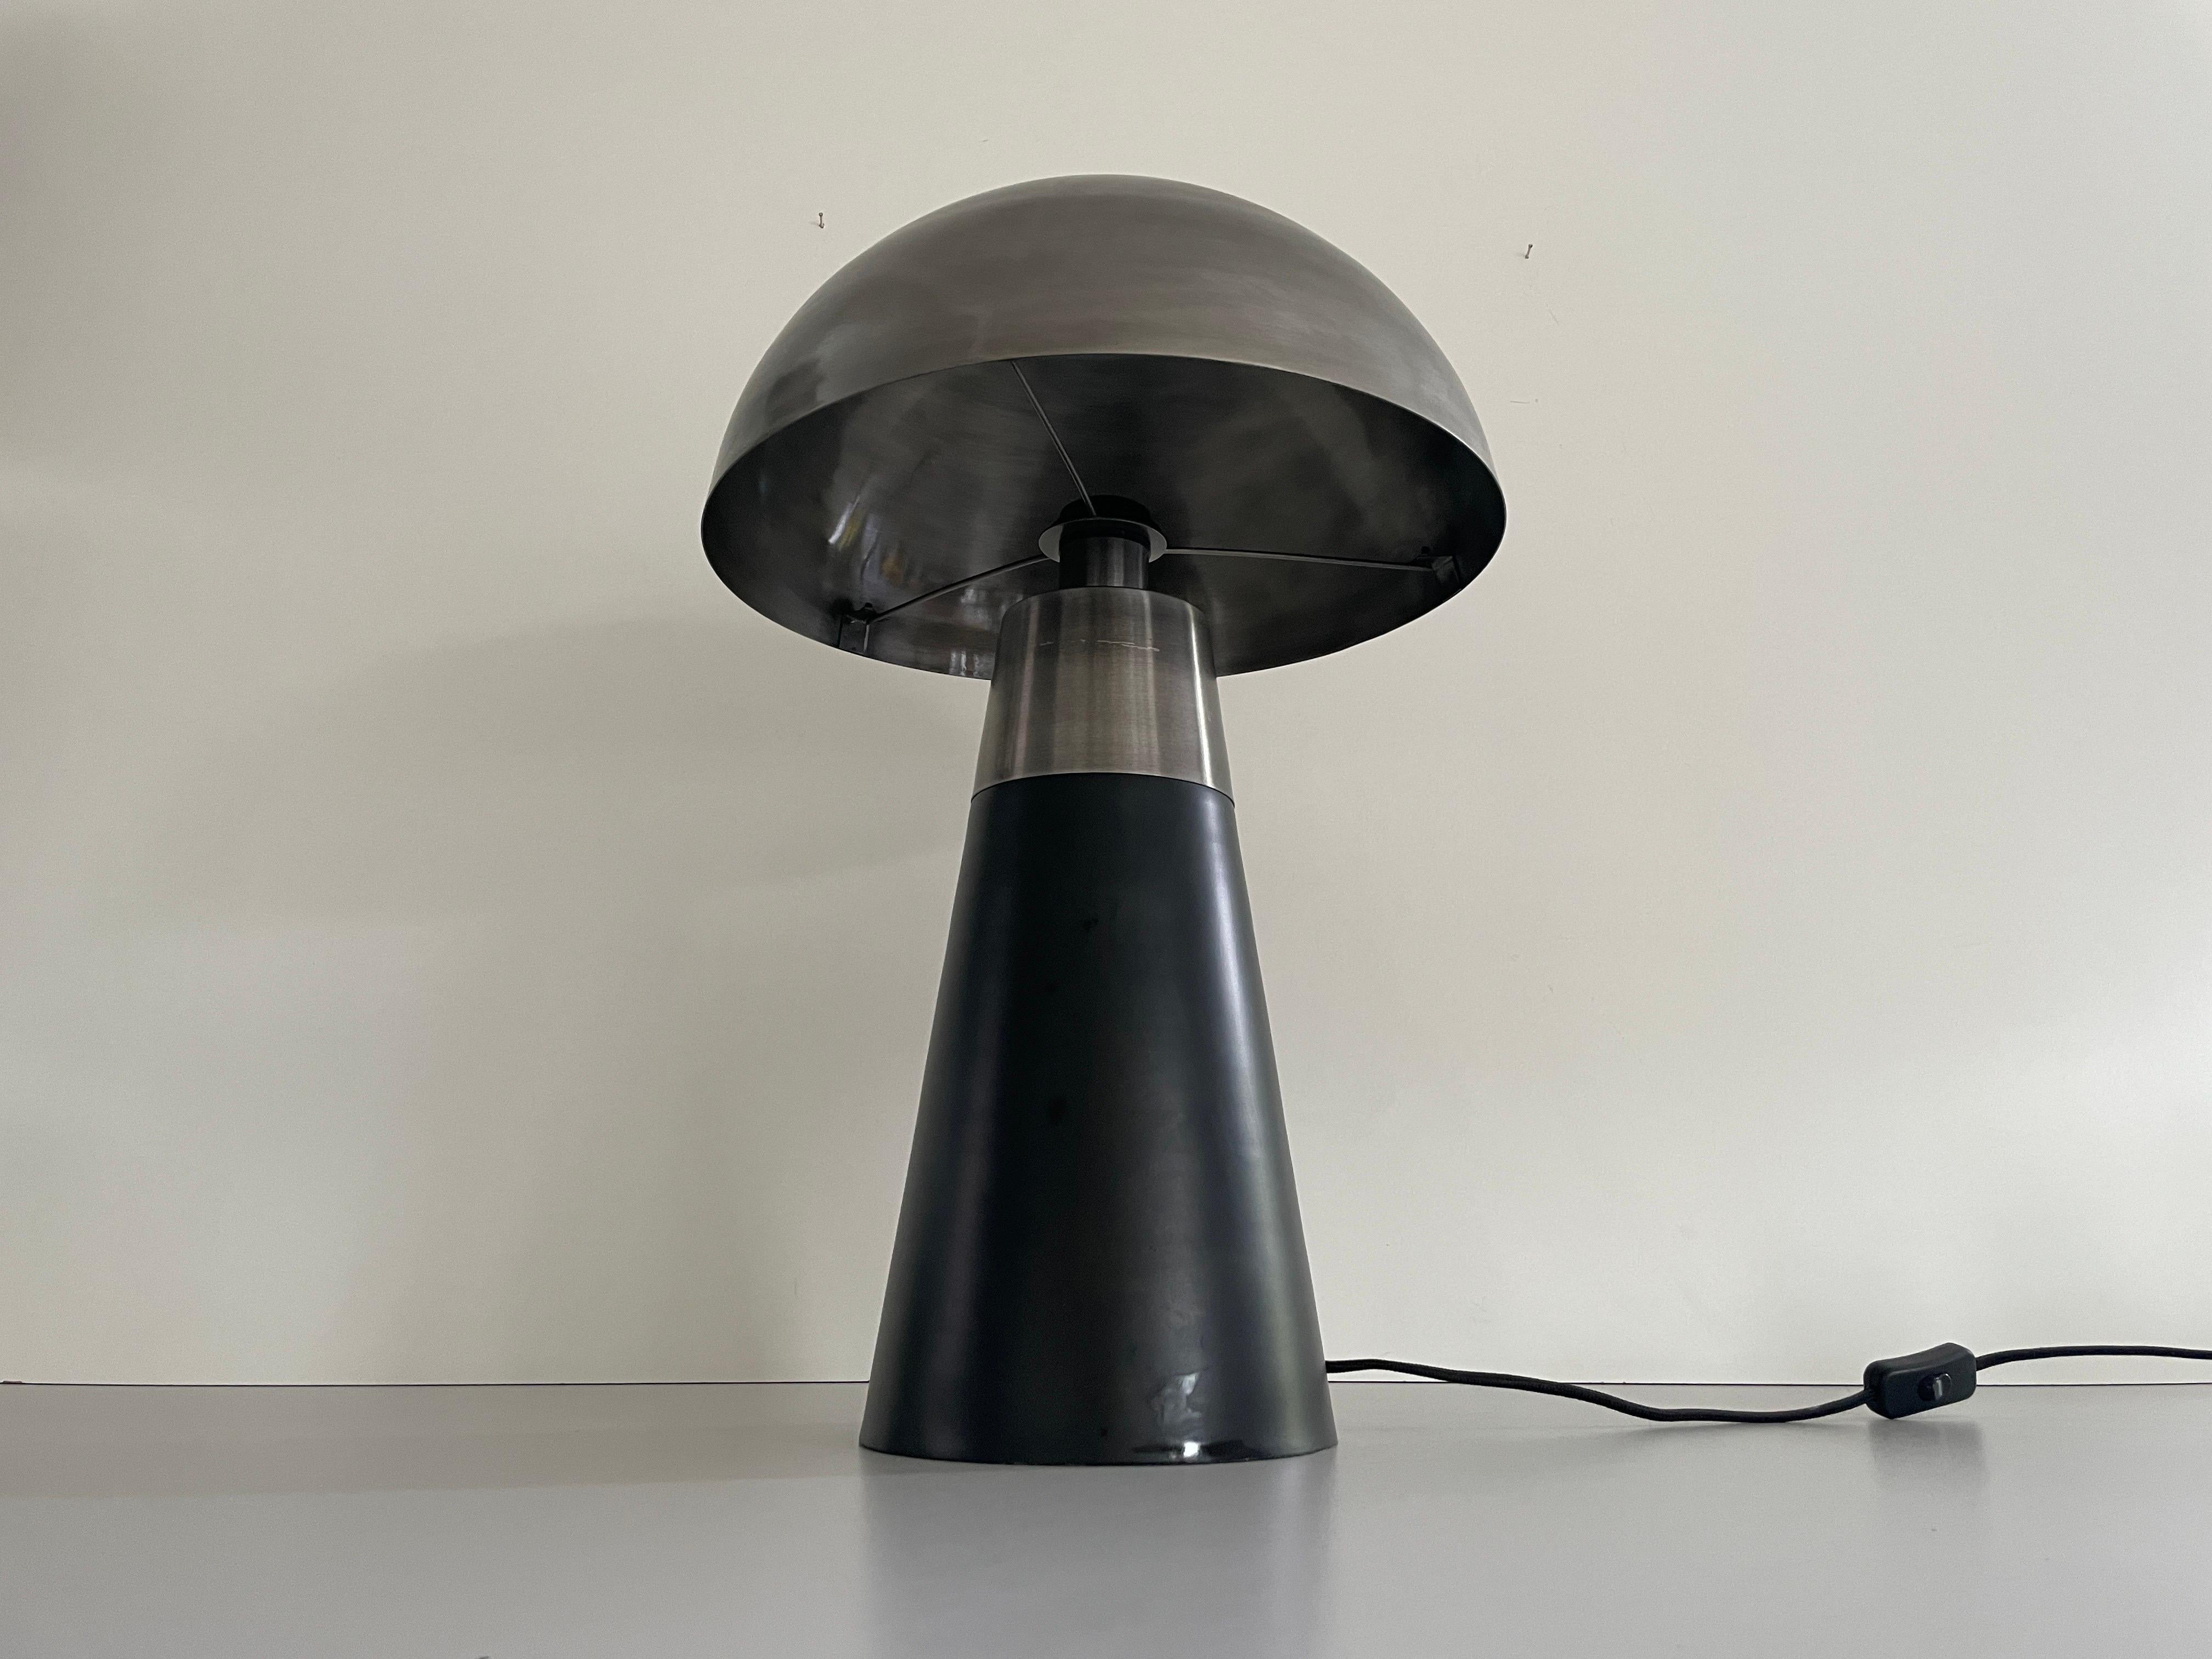 Muschroom and Conic Design Large Table Lamp by LAMBERT, 1980s, Germany

Lampshade is in good condition and very clean. 
This lamp works with E27 light bulb. 
Wired and suitable to use with 220V and 110V for all countries.

Measures: 

Diameter: 39